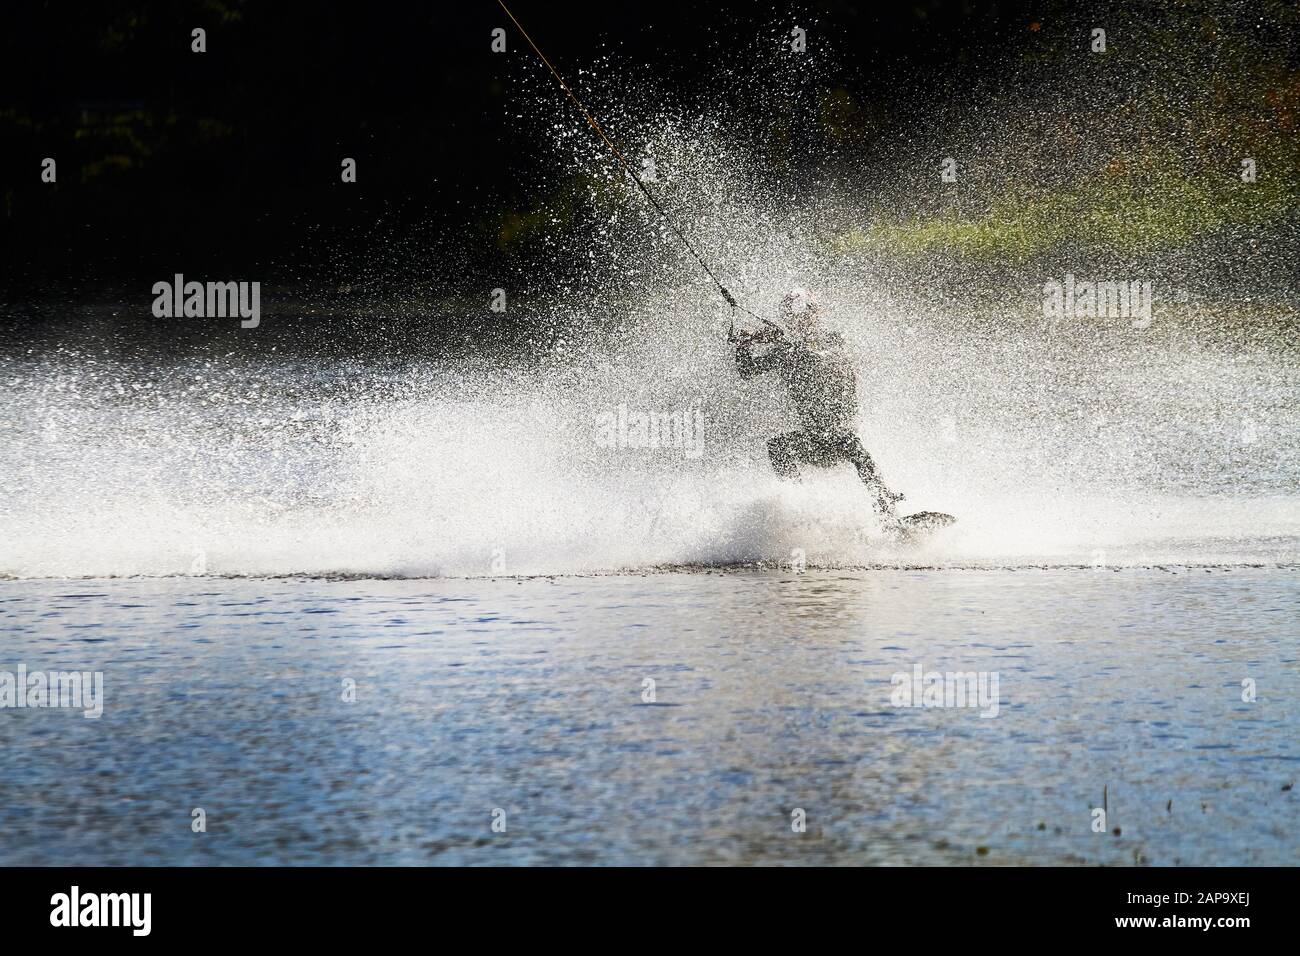 Wakeboarder surfing across a lake with water splashing. This is an extreme sport. Stock Photo